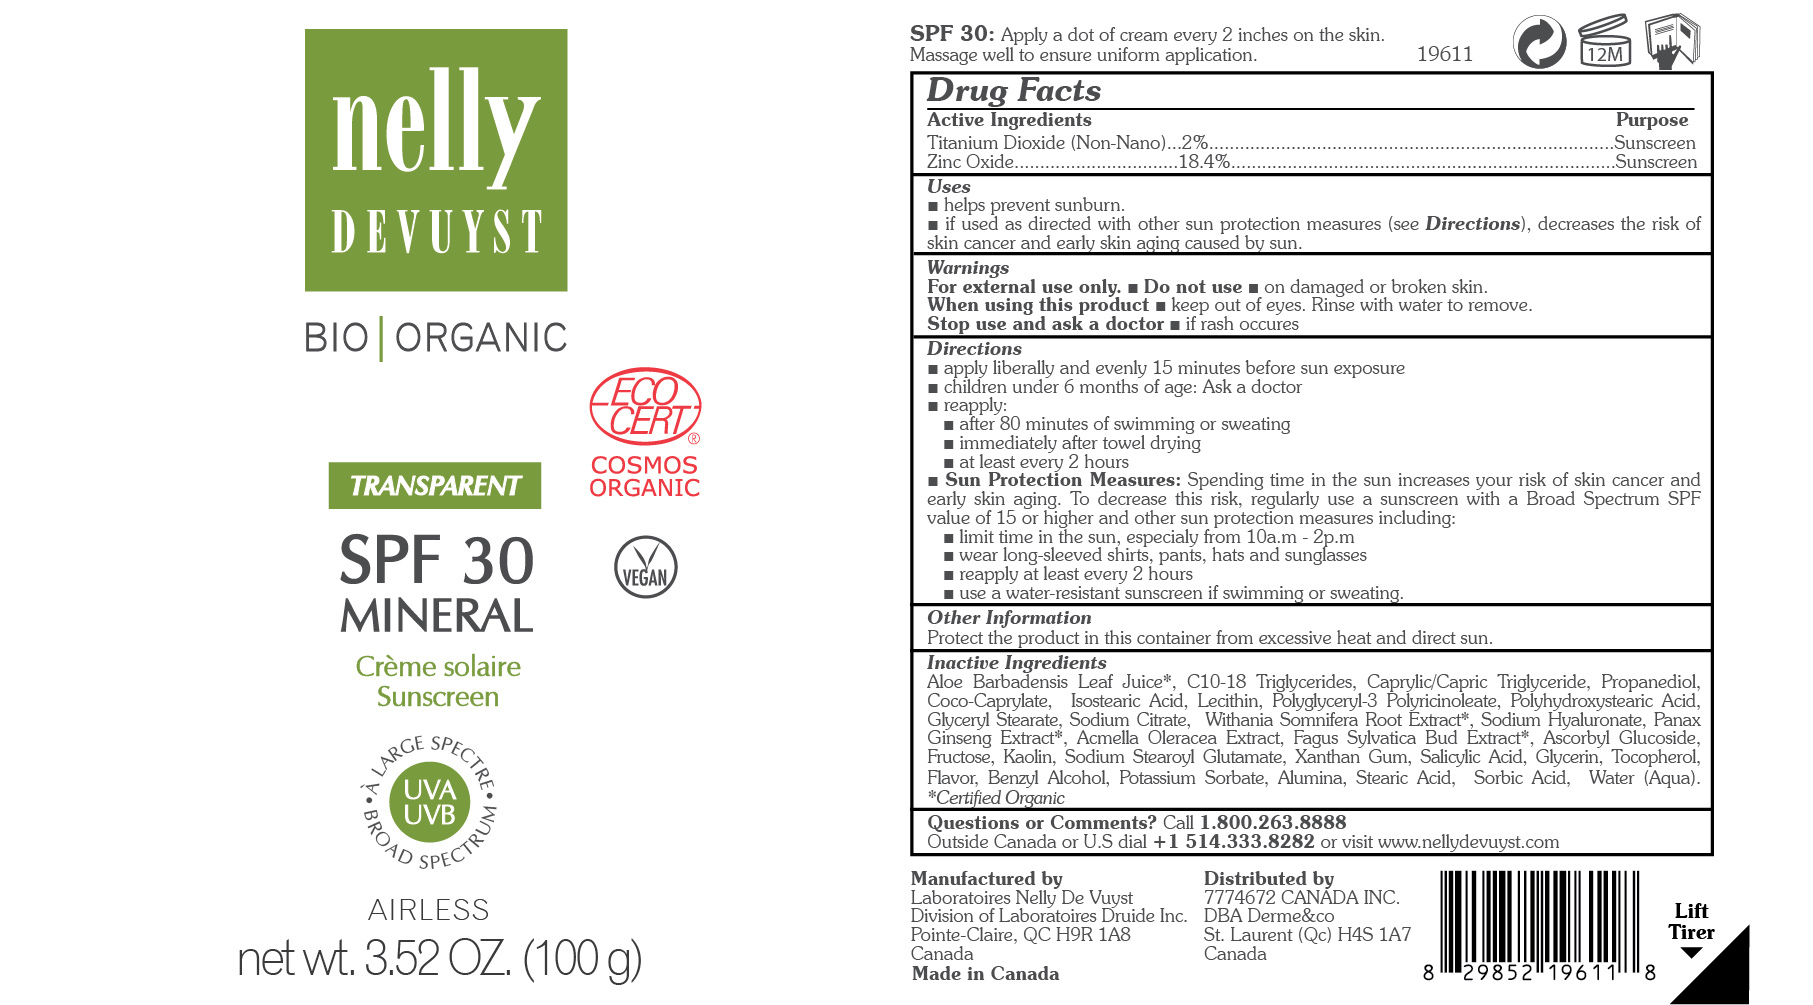 Nelly Devuyst Transparent Mineral Sunscreen